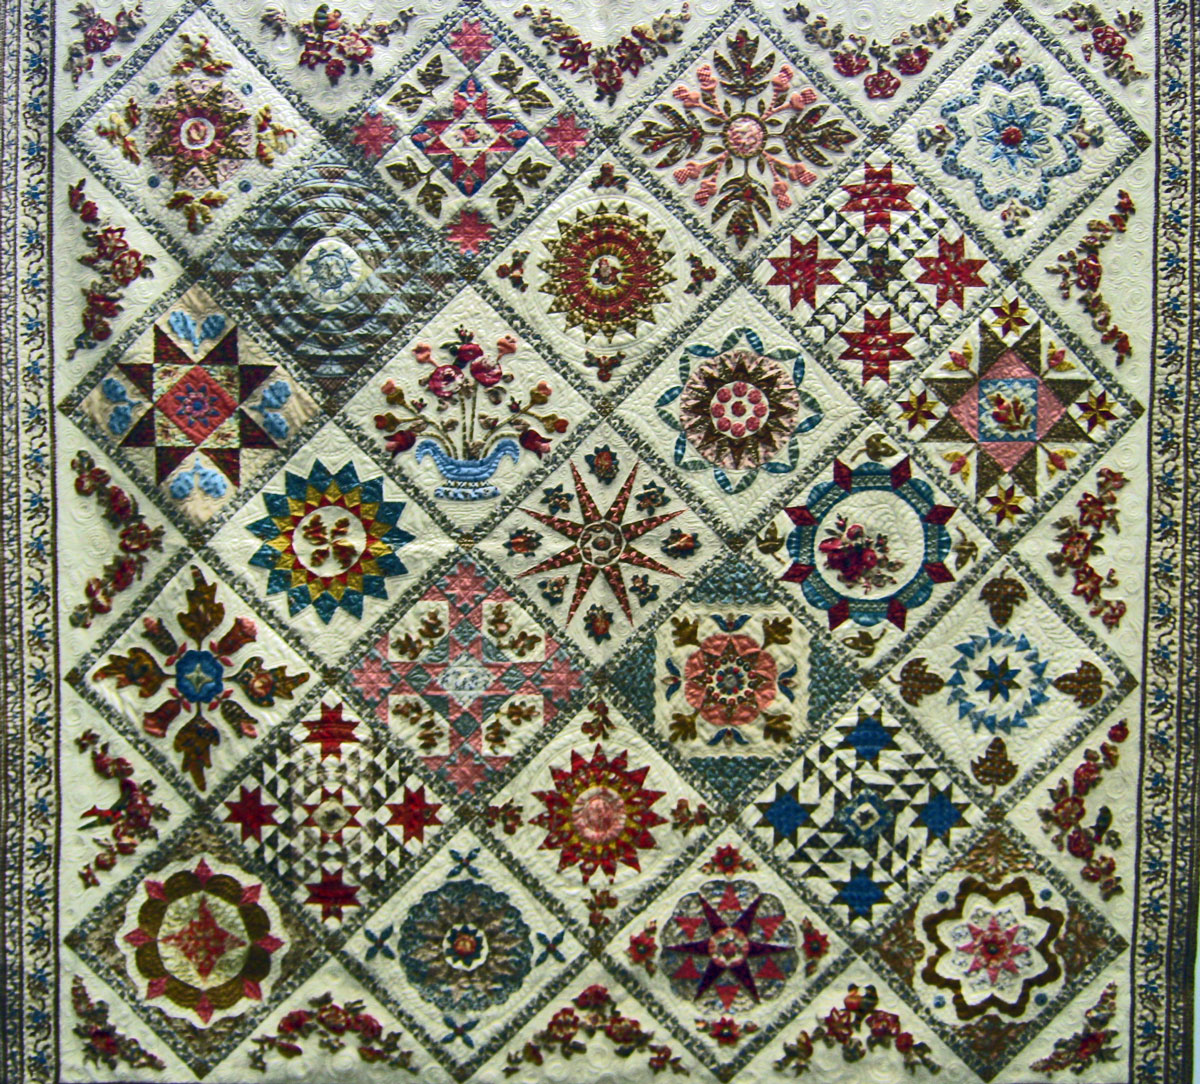 Di ford quilt #5